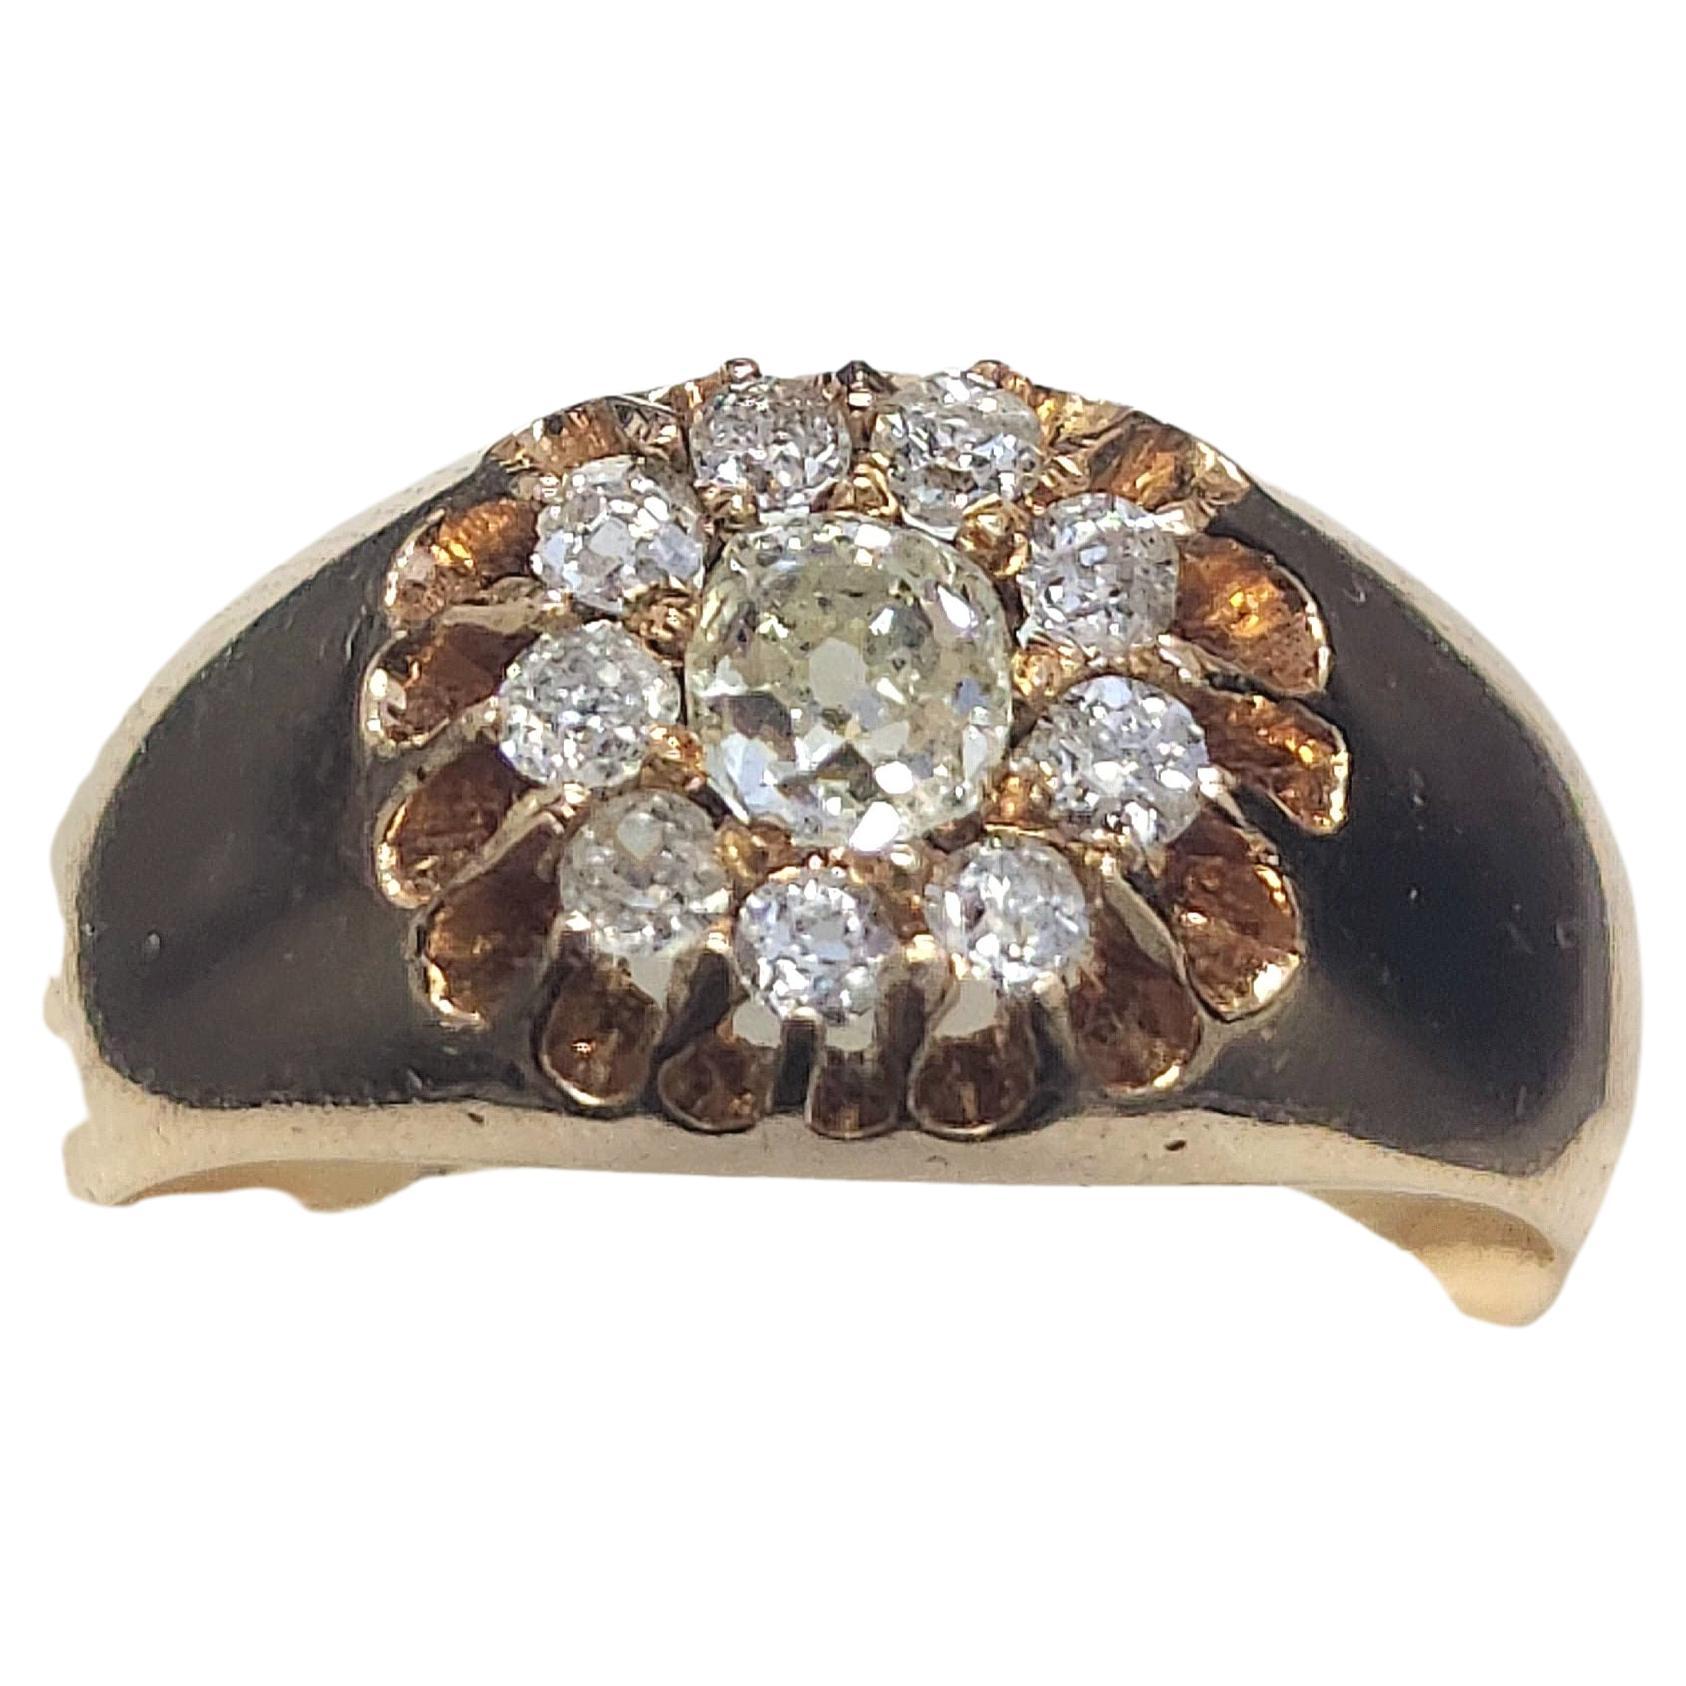 Antique 14k gold heavy gold weight ring centered with 1 old mine cut diamond diameter of 4.30mm estimate weight of 0.50 carat flanked with smaller old mine cut diamonds estimate weight 0.90 carats ring was made during early soviet union era 1930.c